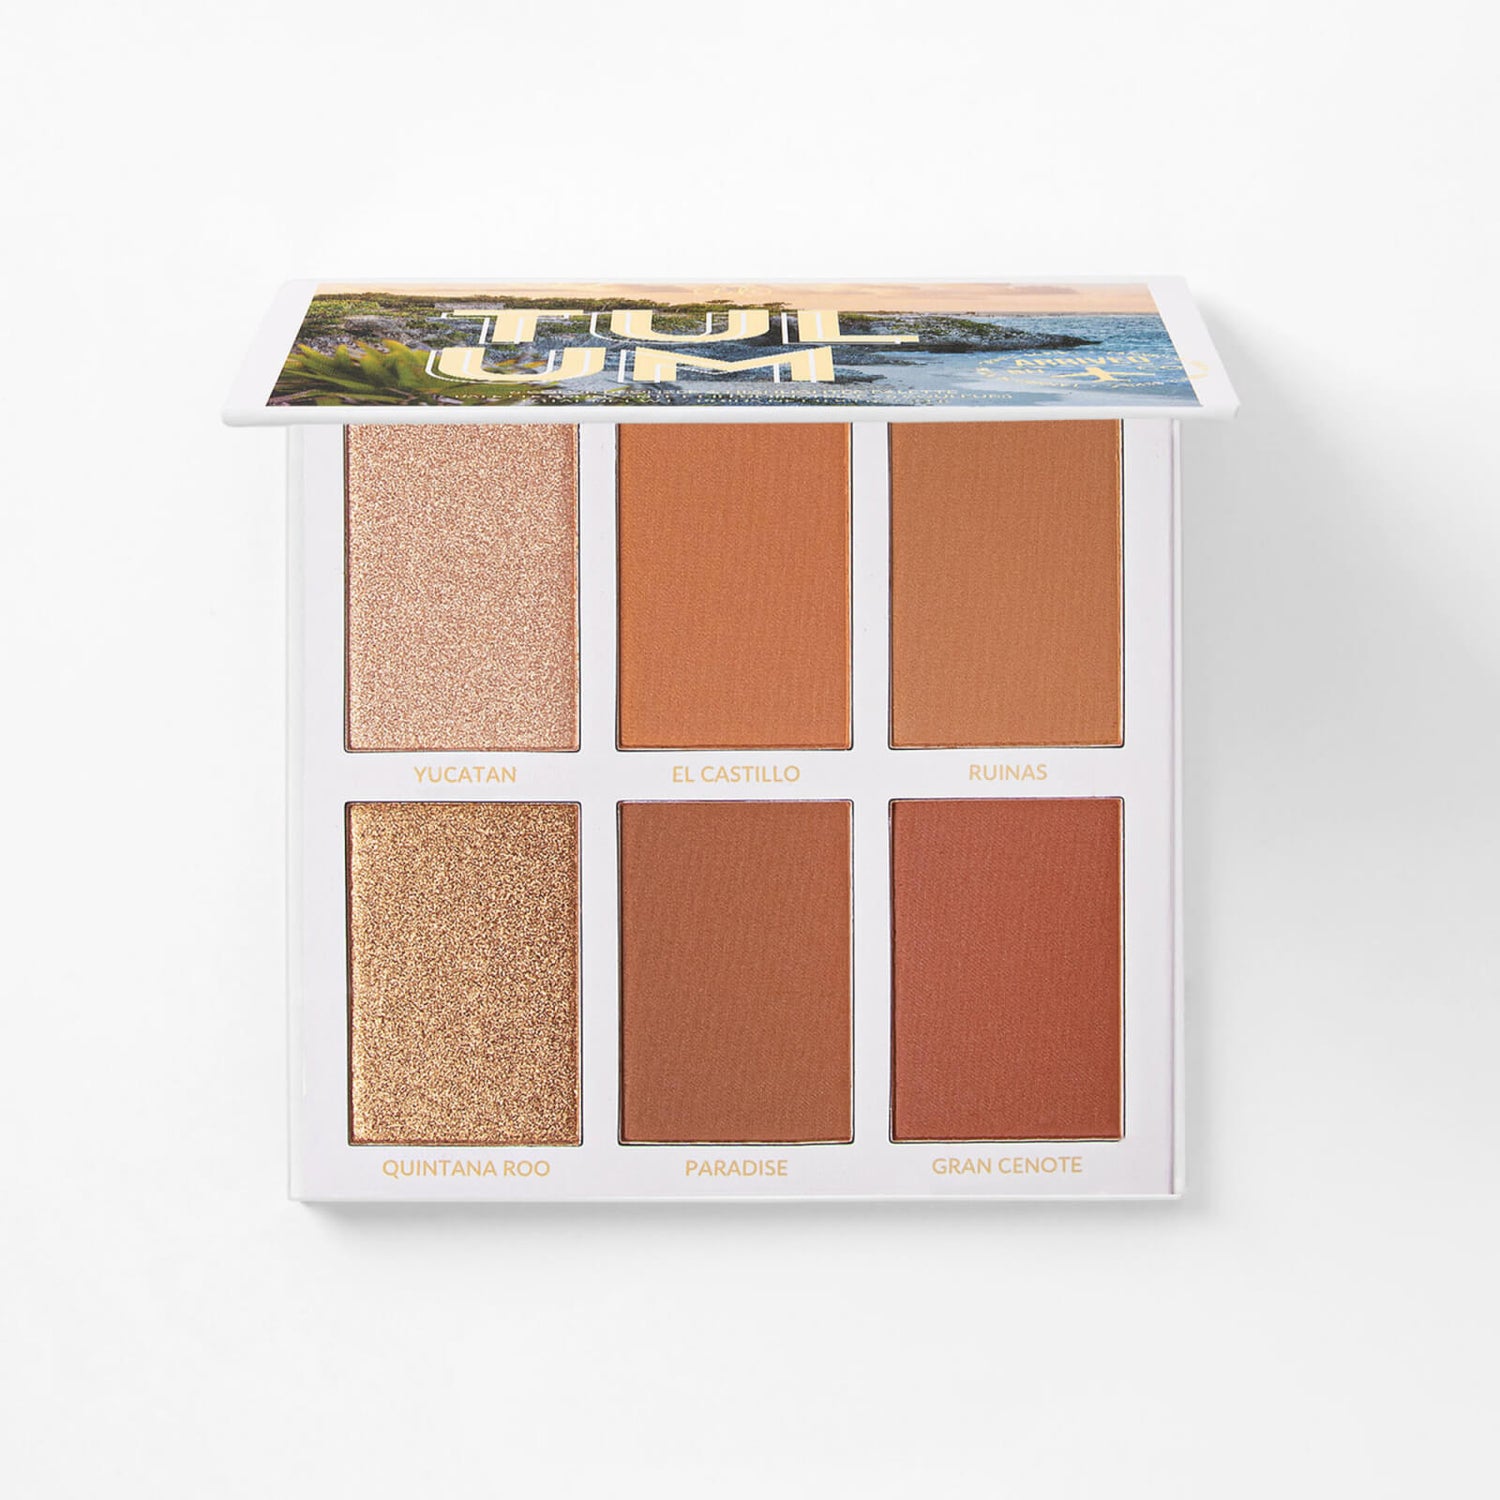 Airfield Mexico skrivning Tanned in Tulum - 6 Color Bronzer & Highlighter Palette | BH Cosmetics